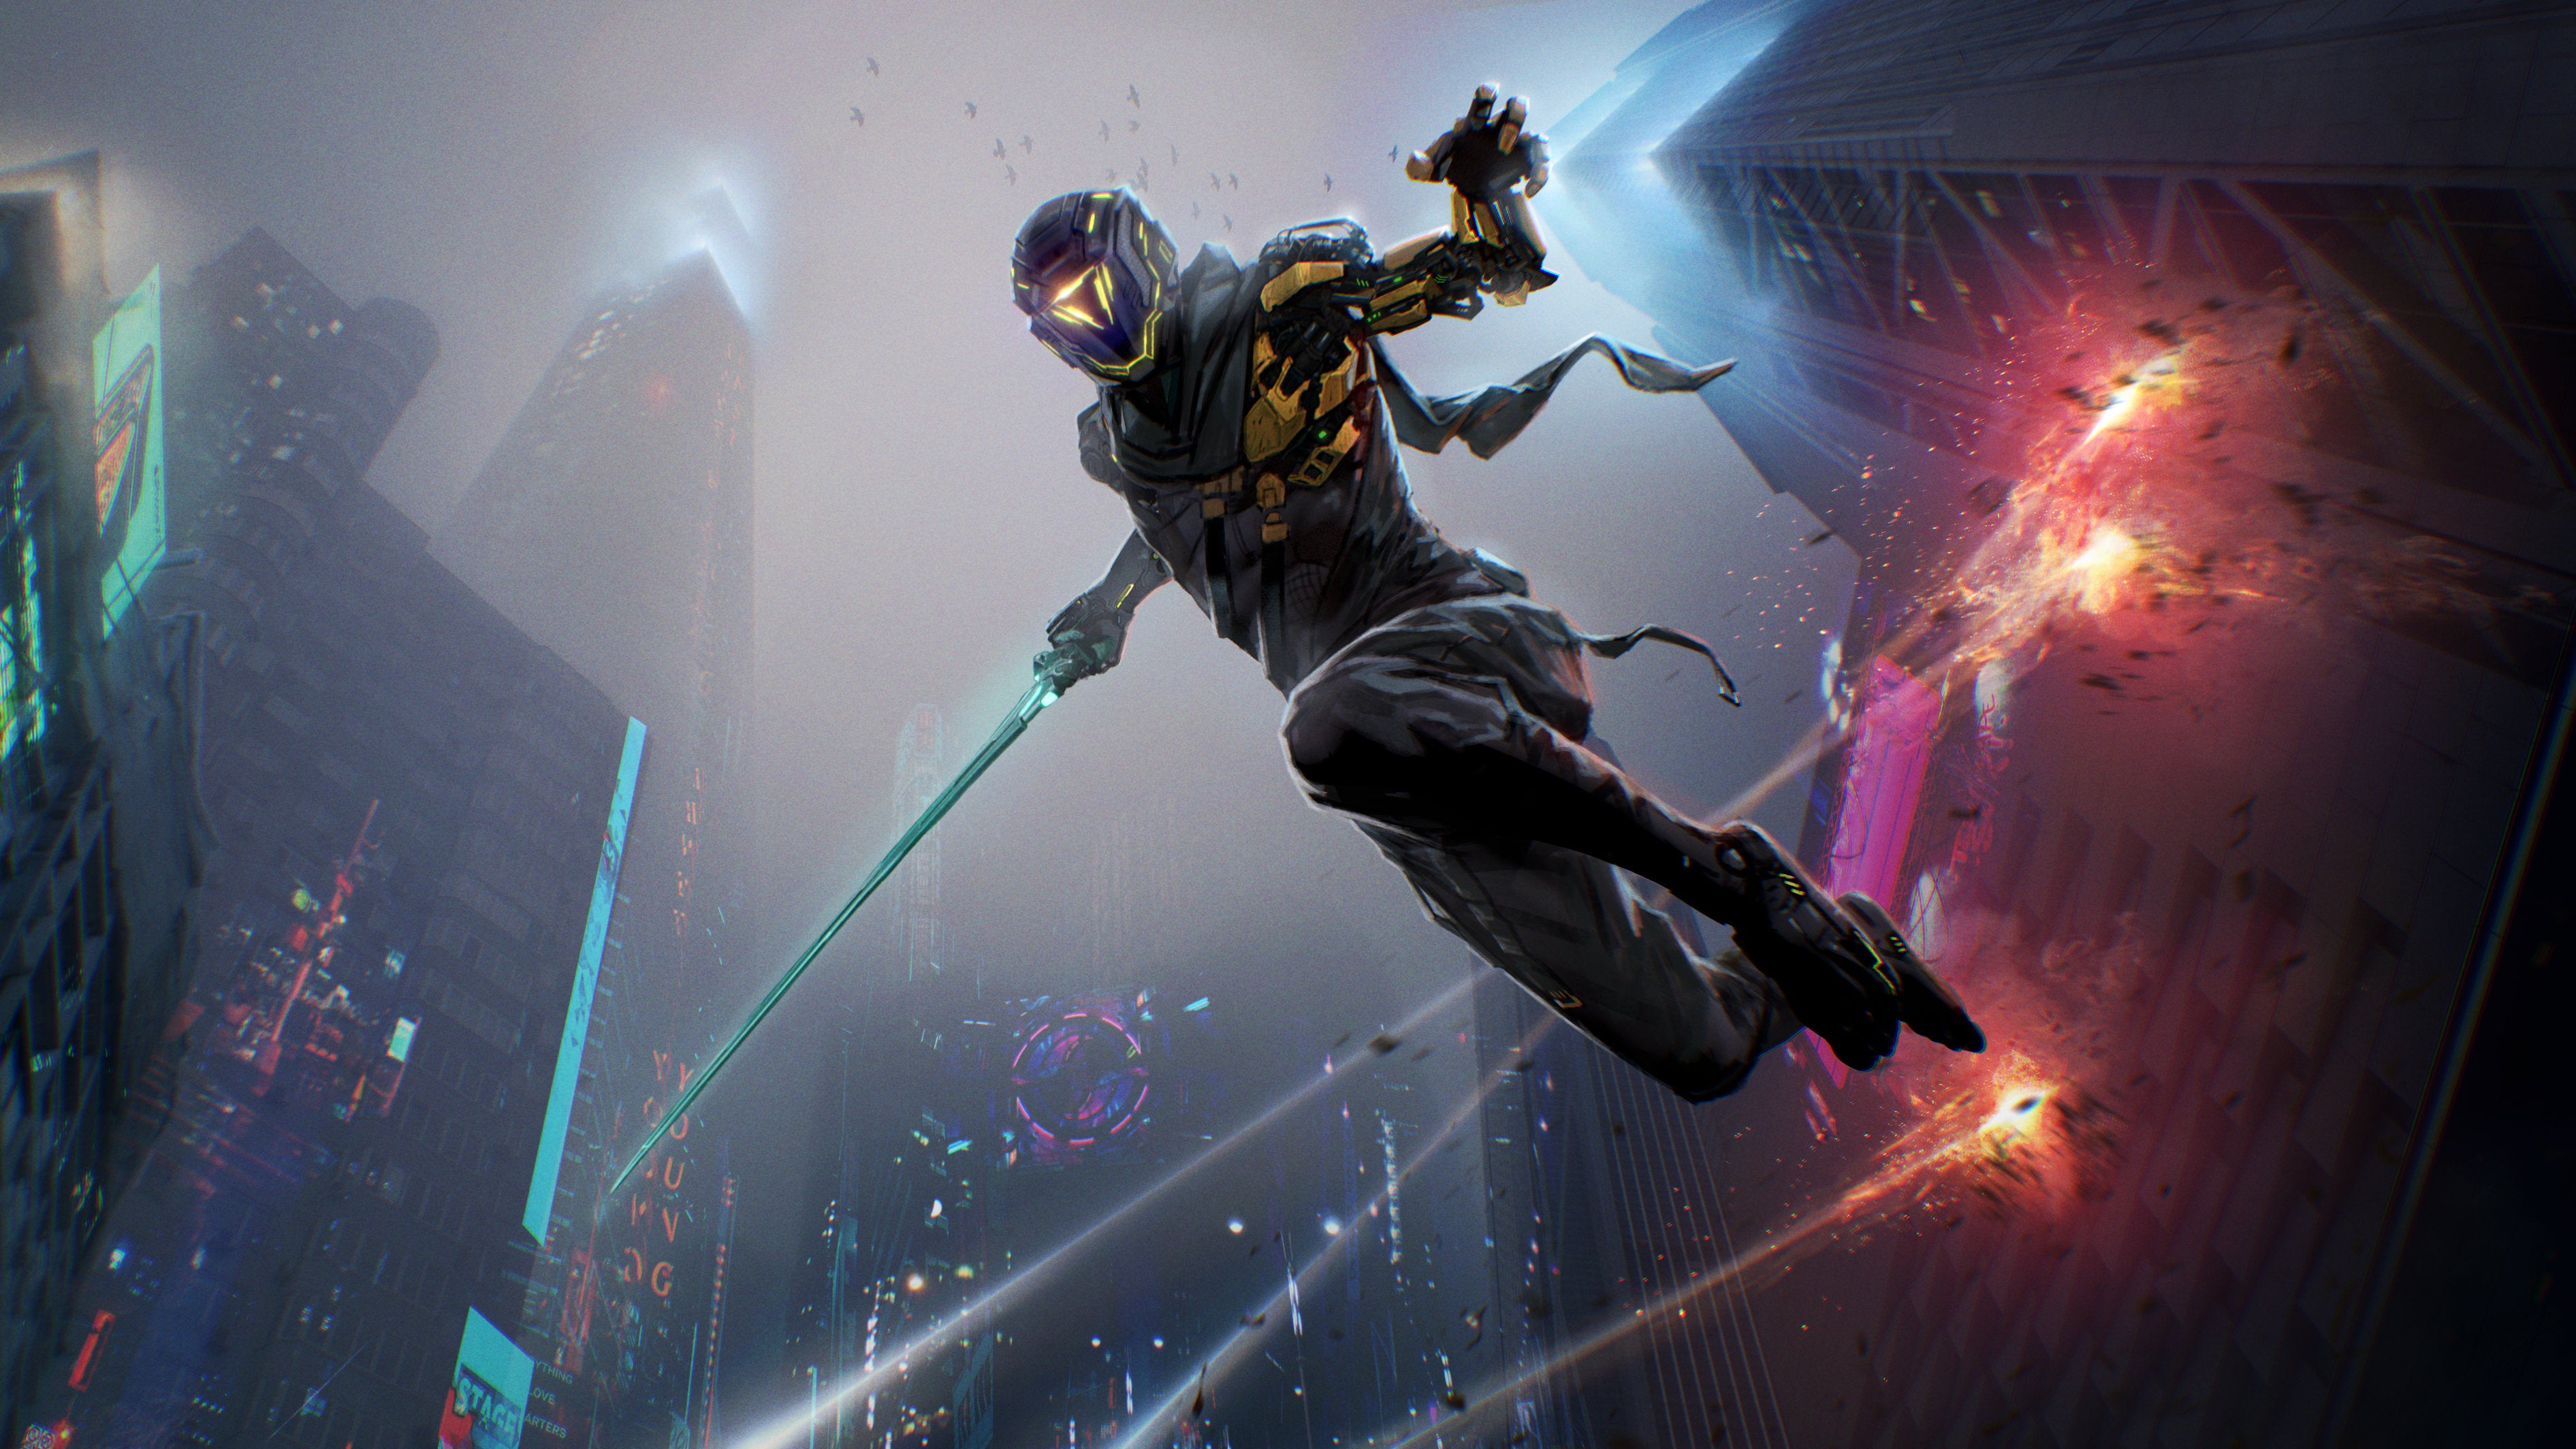 Image for Cyberpunk ninja slasher Ghostrunner has a sequel in the works